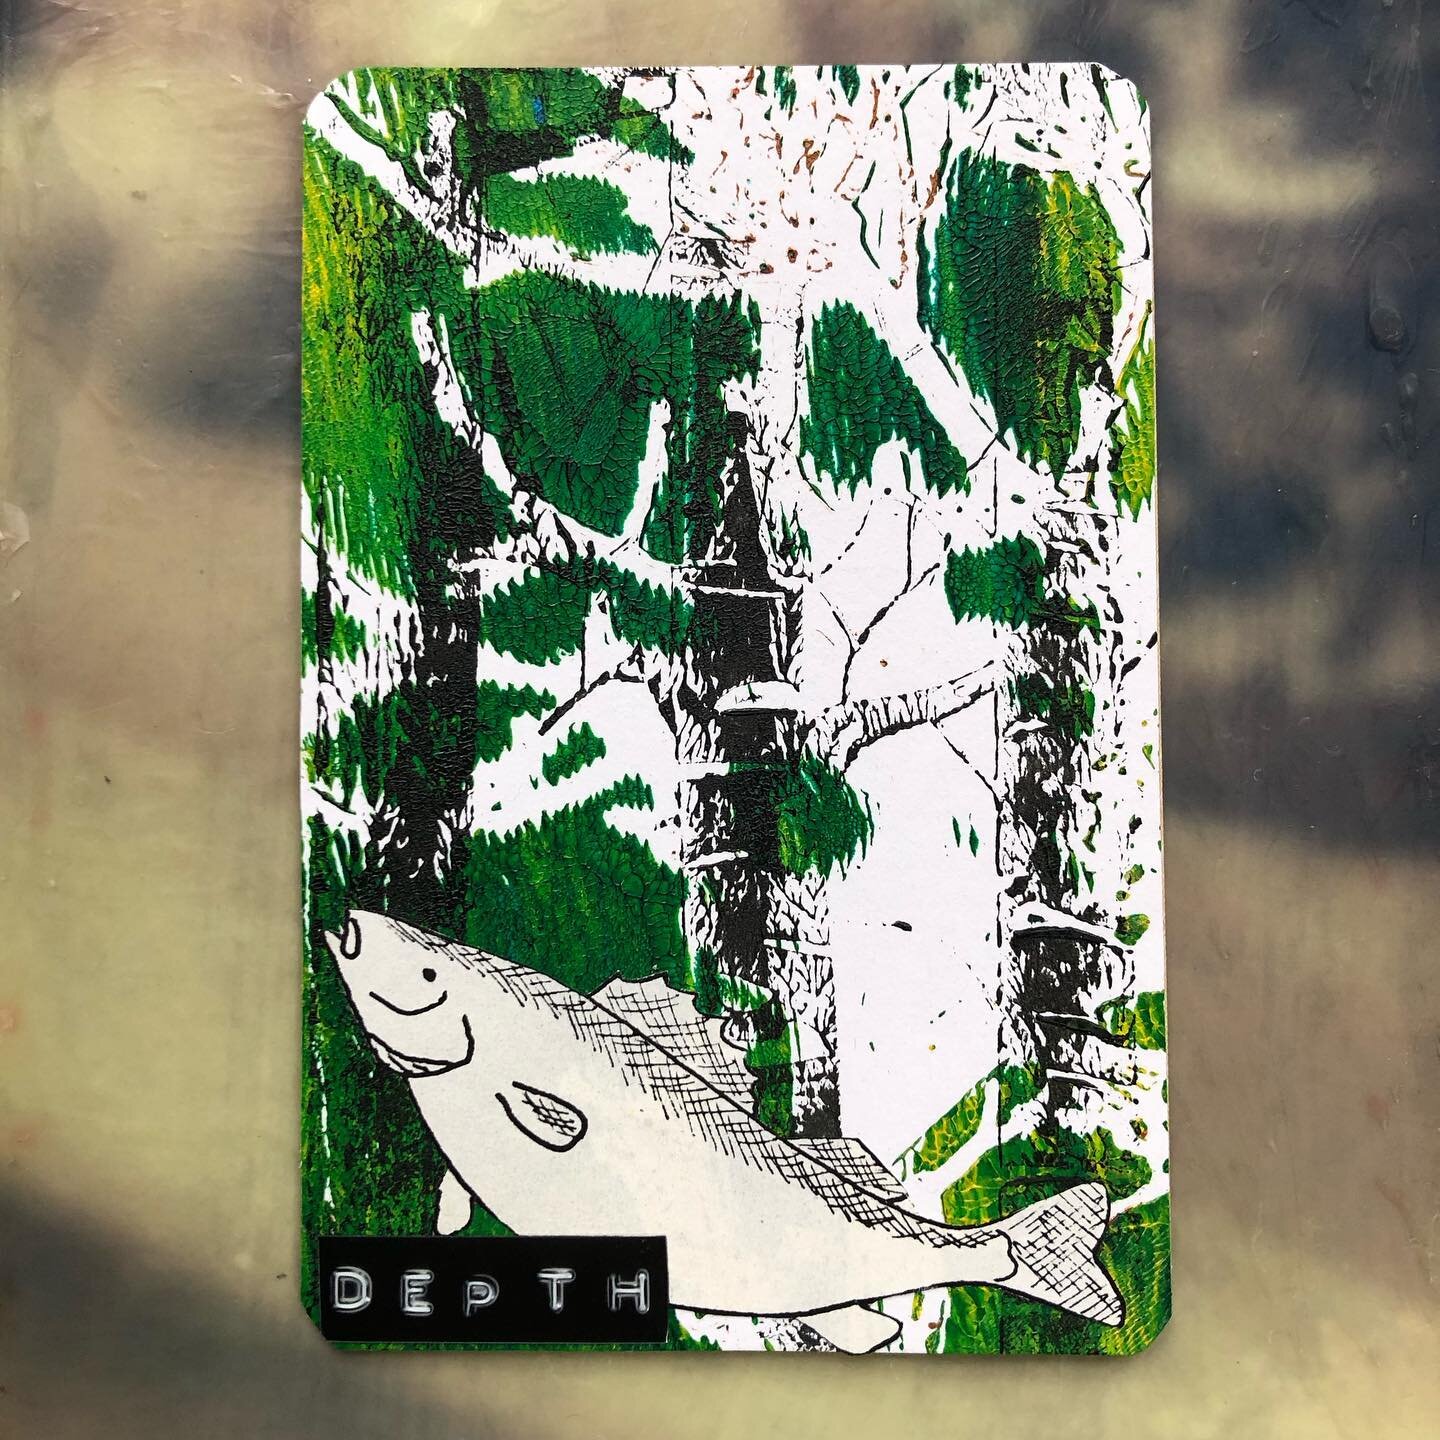 Depth. Swimming in it with @omkari_williams while I made this card for my #buildanewworlddeck 
Omkari asked some excellent questions and I&rsquo;m chewing on them&mdash;wandering deeper into the forest, plunging into murky waters, doing my best to se